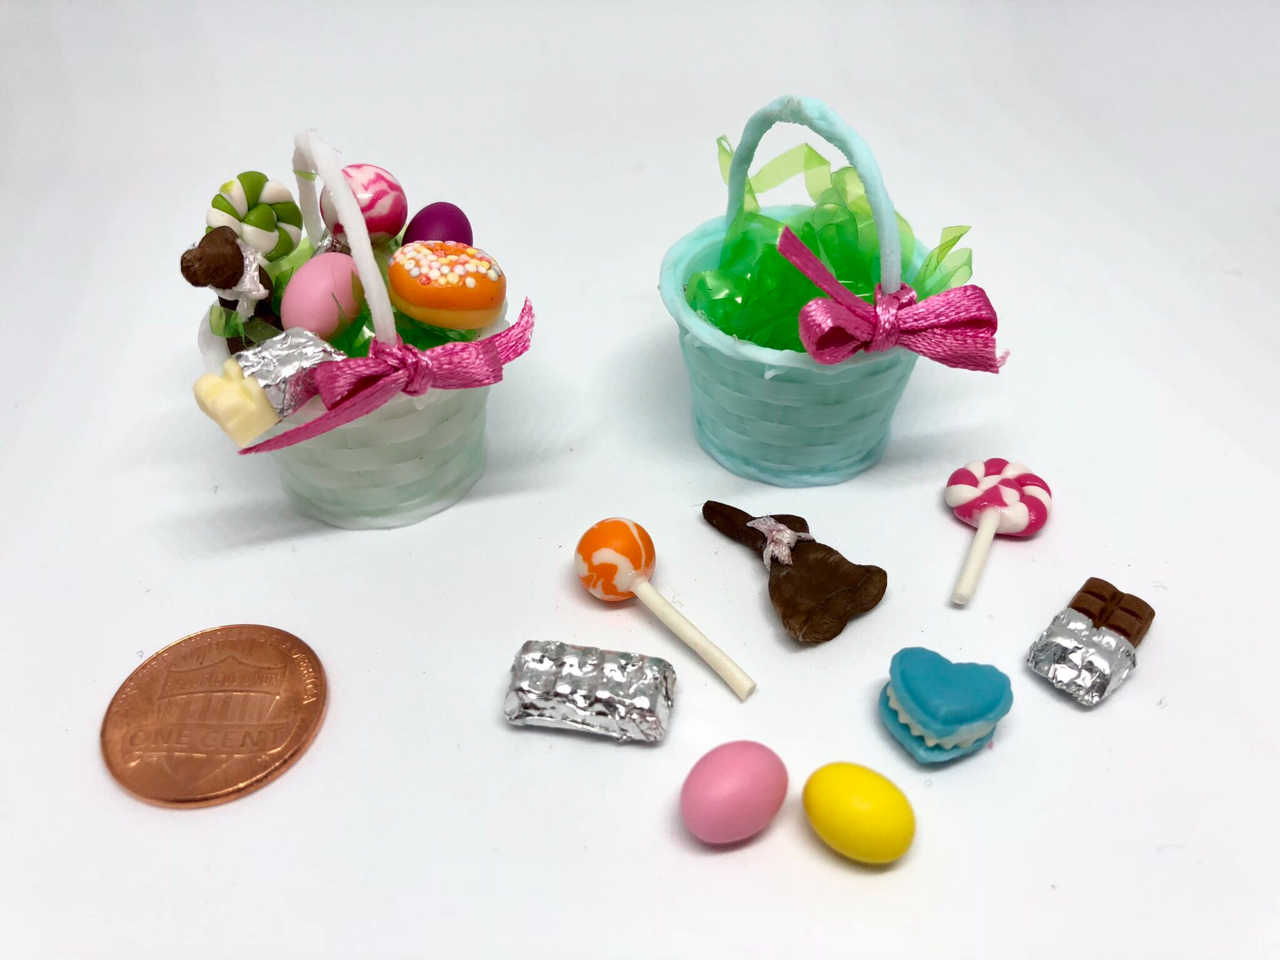 1/12 Scale Dollhouse Miniature Filled Easter Basket: Chocolate Bunny Eggs Candy